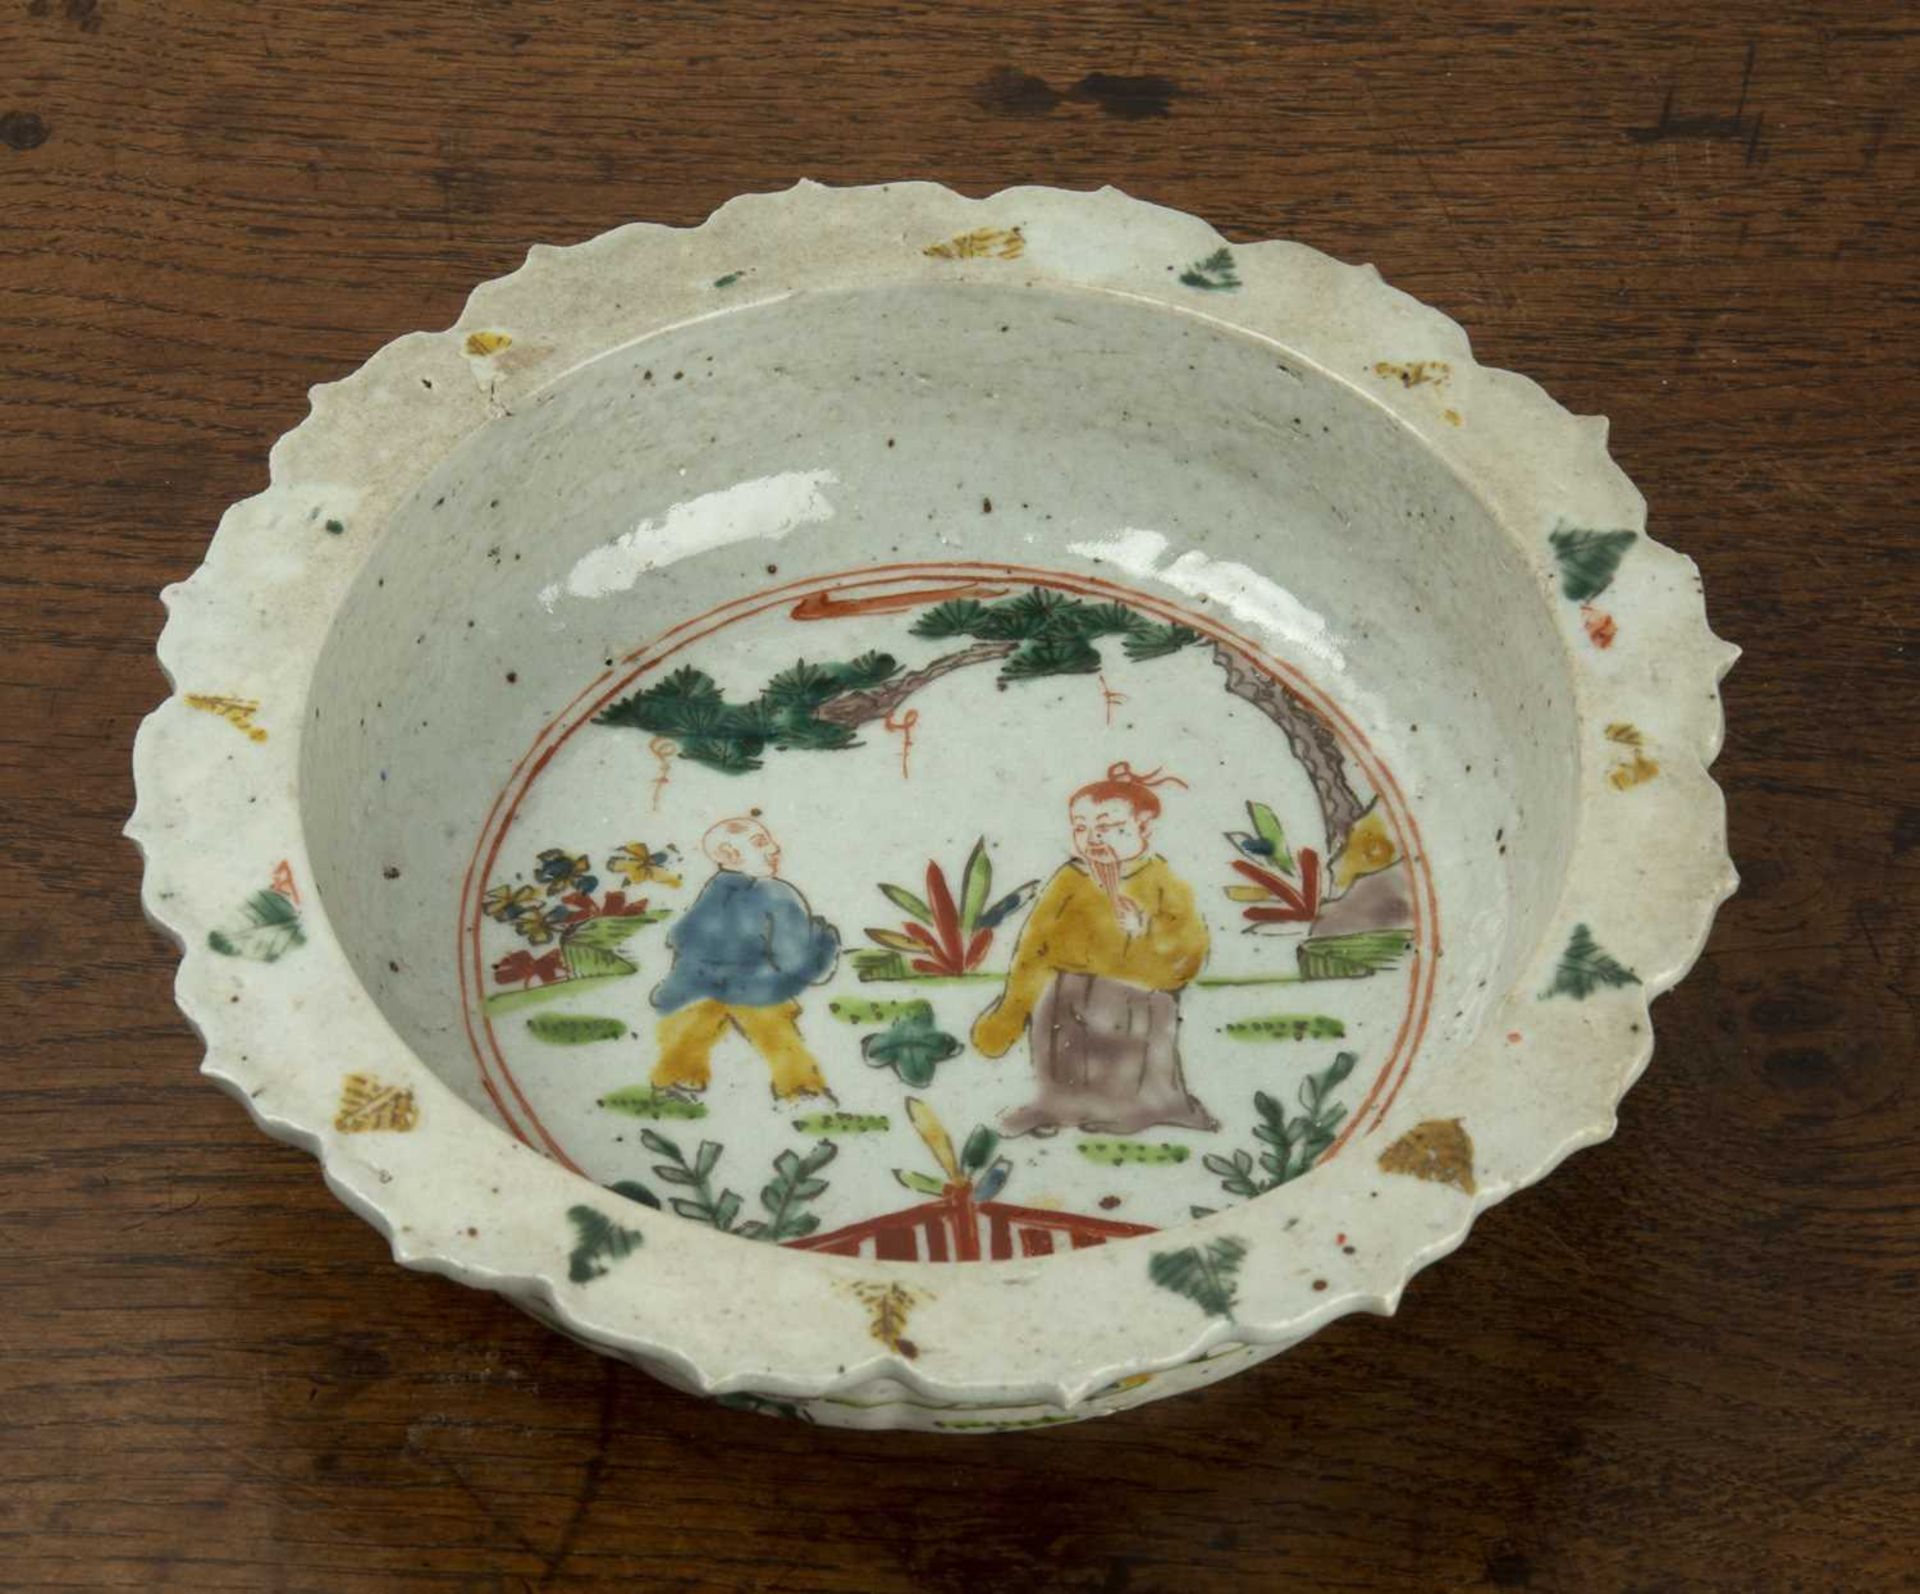 Famille verte small basin style bowl Chinese provincial, 18th/19th Century with wide petal shape - Image 2 of 3